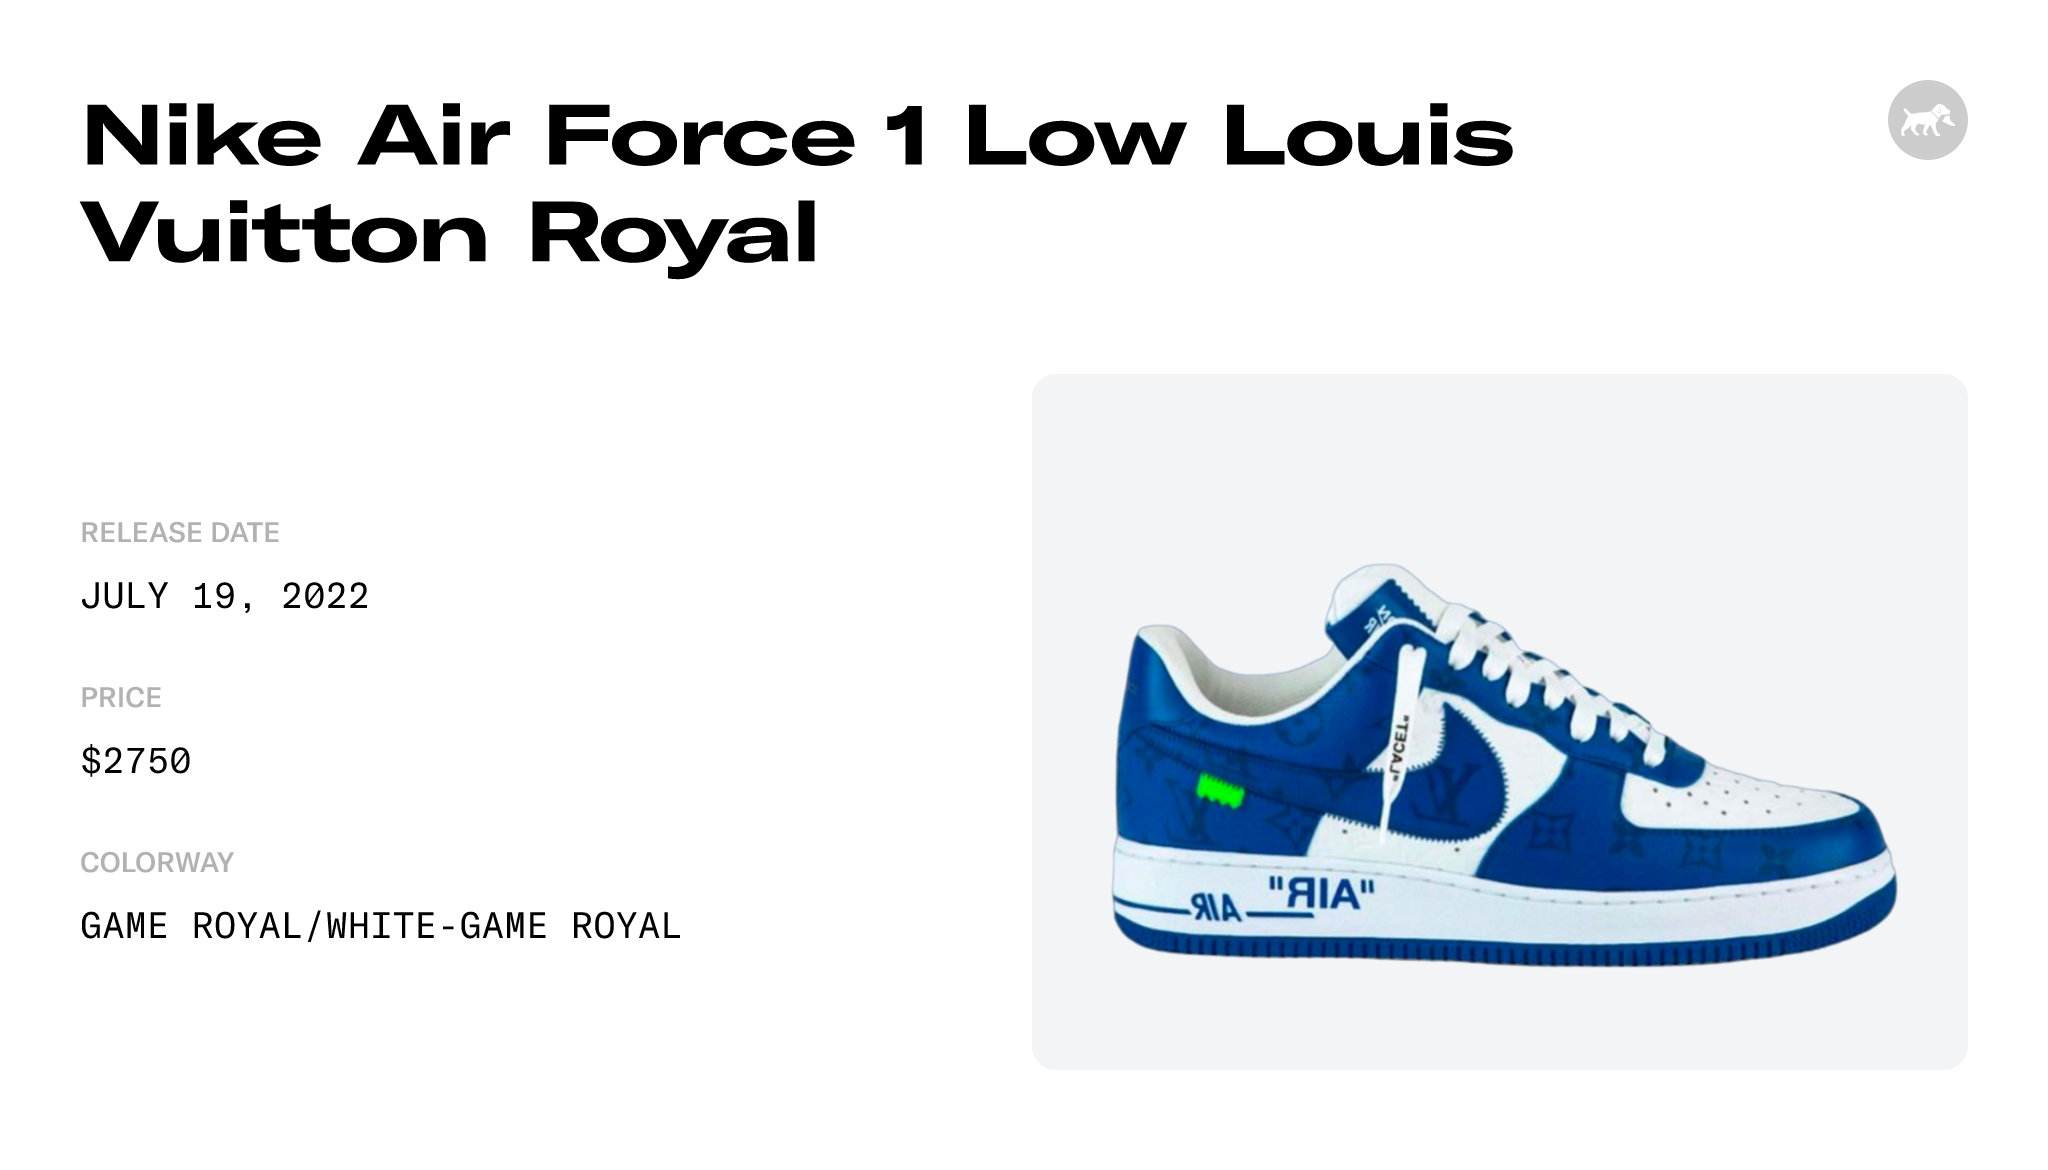 Release 2022 April] Louis Vuitton × Nike Air Force 1 Collection